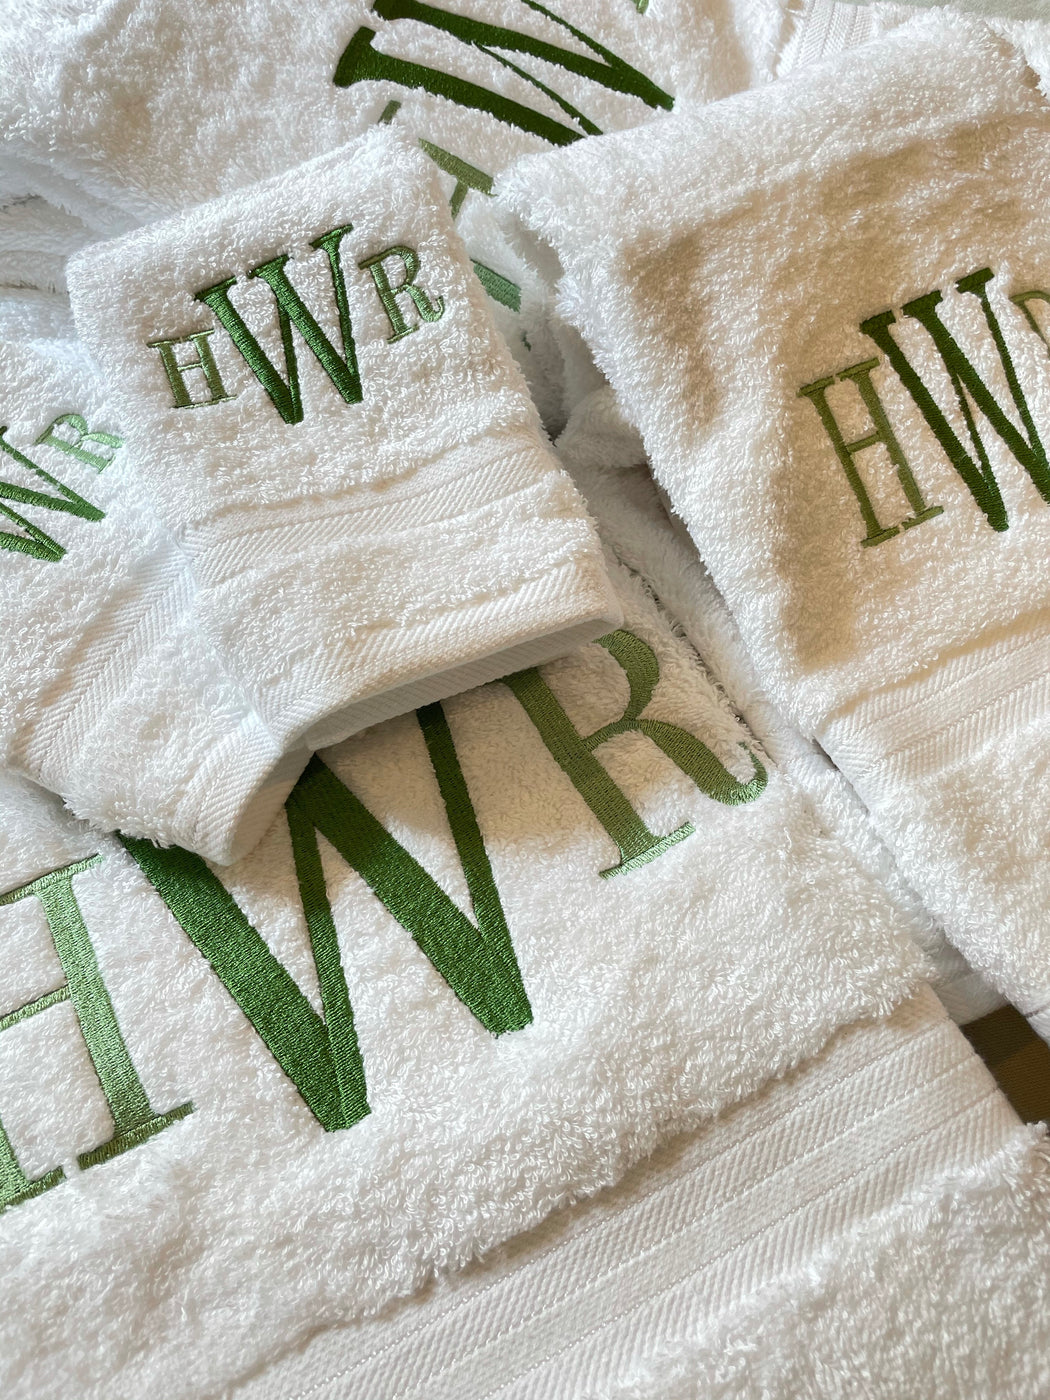 Set of 3 Monogrammed Towels with Acrylic Washing Cup — The Doily Lady